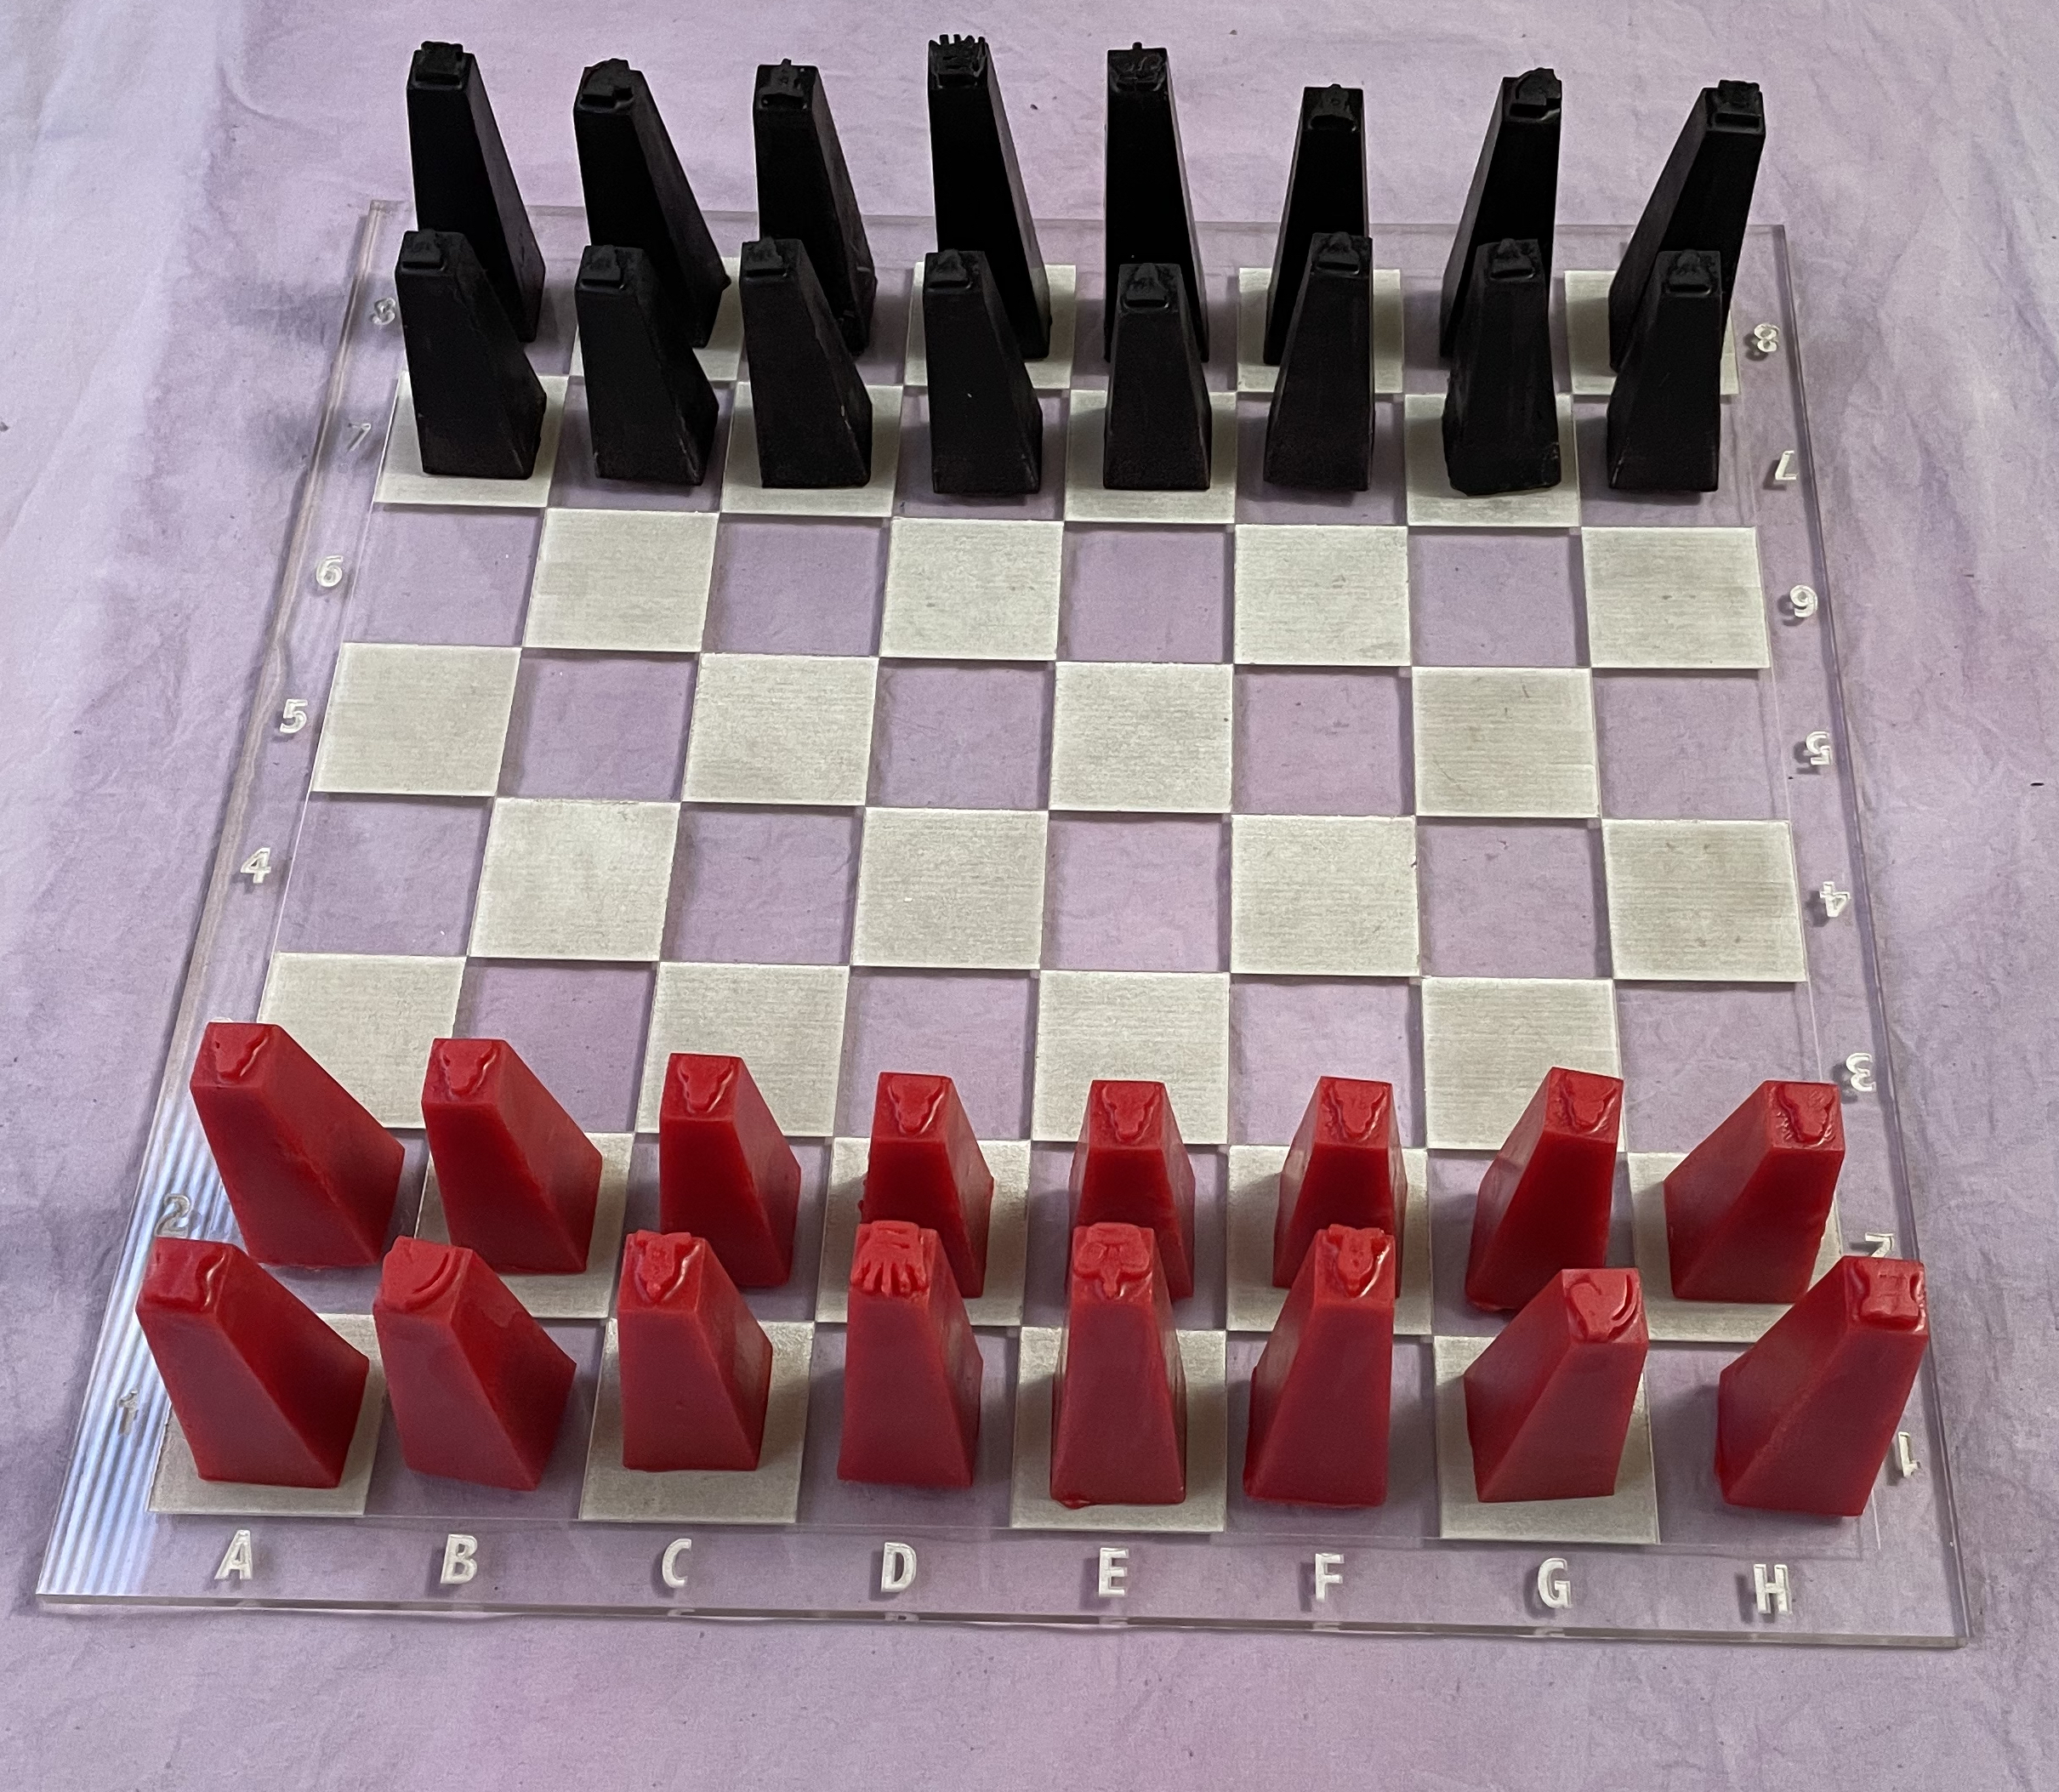 Silicone Chess Piece Molds - 6 styles